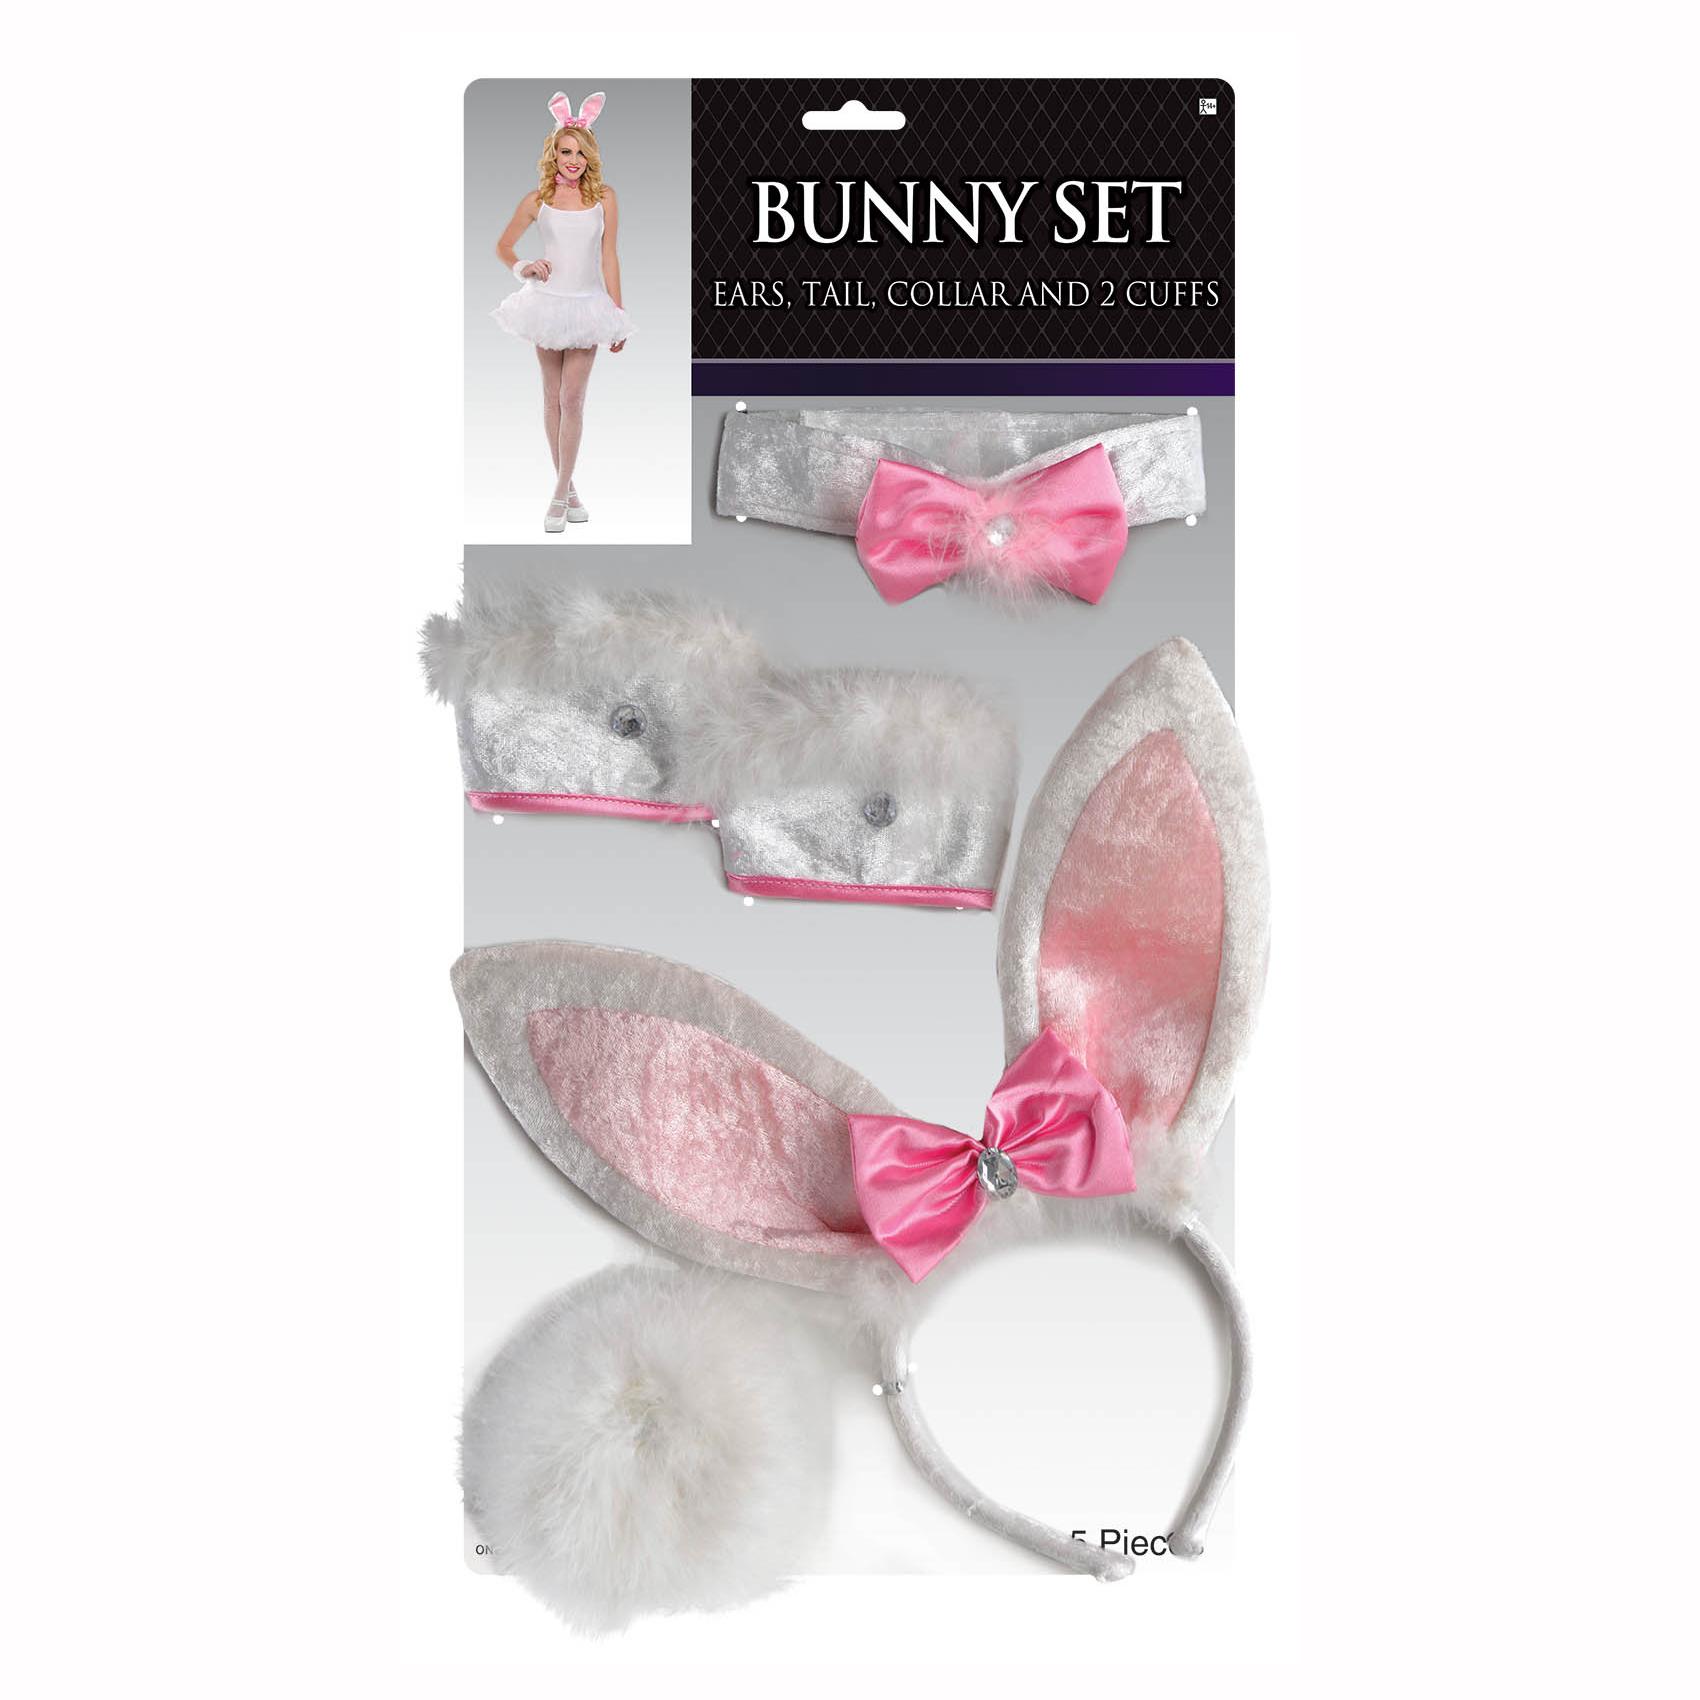 Bunny Set Costumes & Apparel - Party Centre